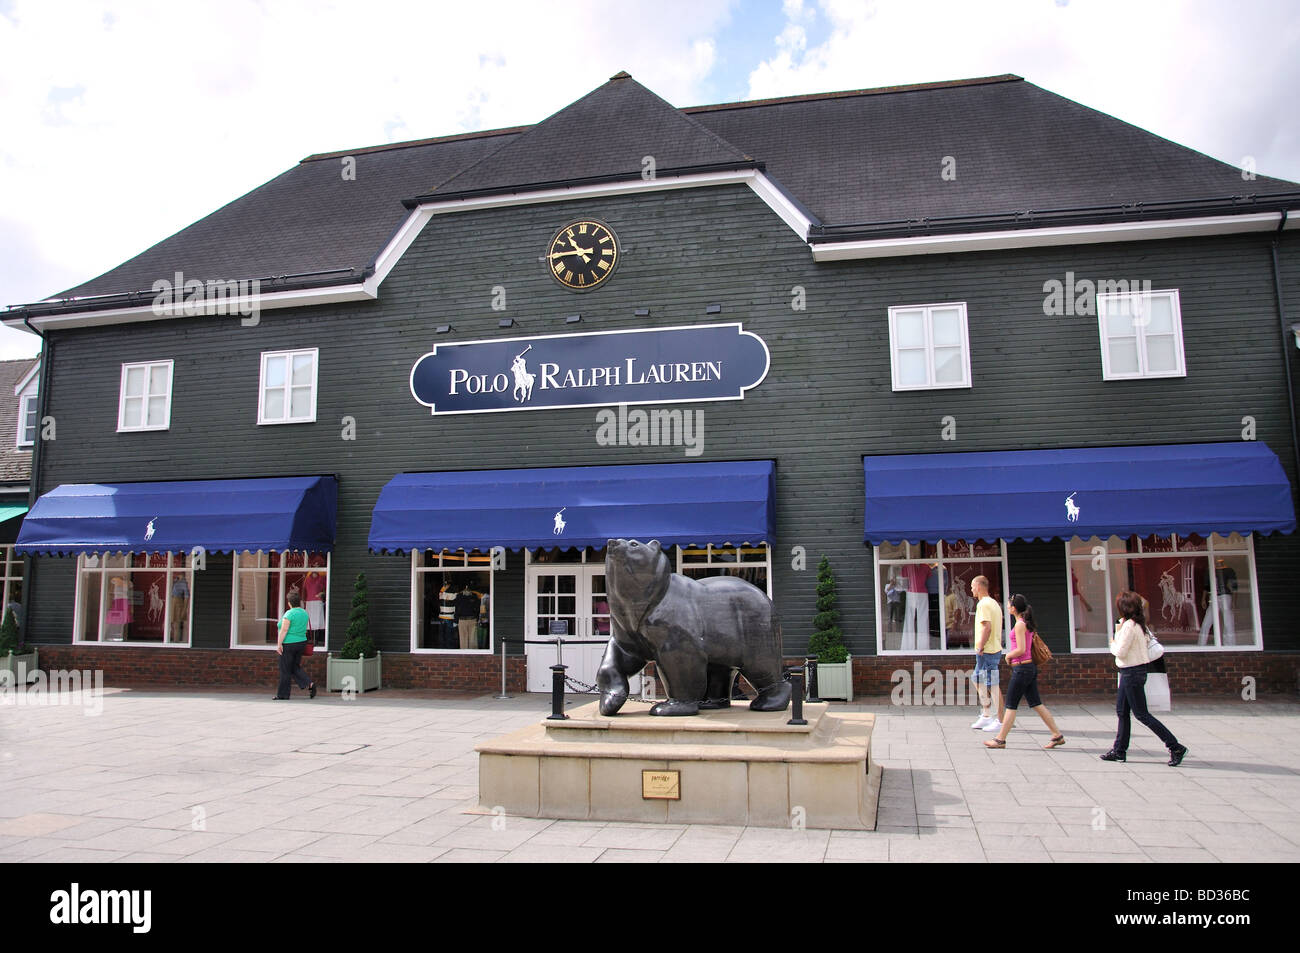 Polo Ralph Lauren store, Bicester Village Shopping Centre, Bicester,  Oxfordshire, England, United Kingdom Stock Photo - Alamy